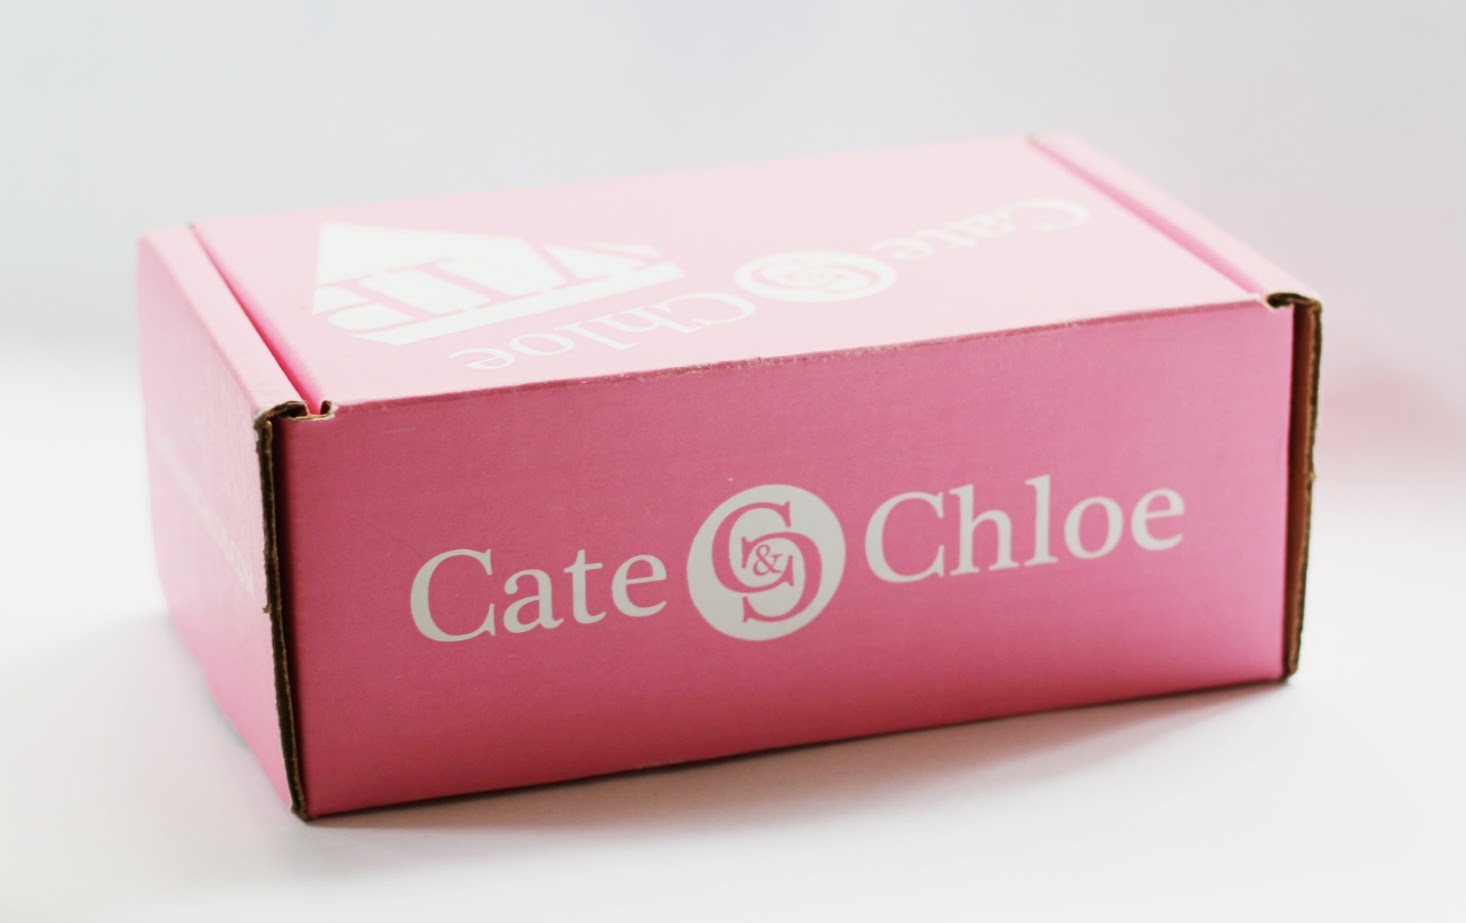 Cate & Chloe Subscription Box Review + Coupon – September 2017